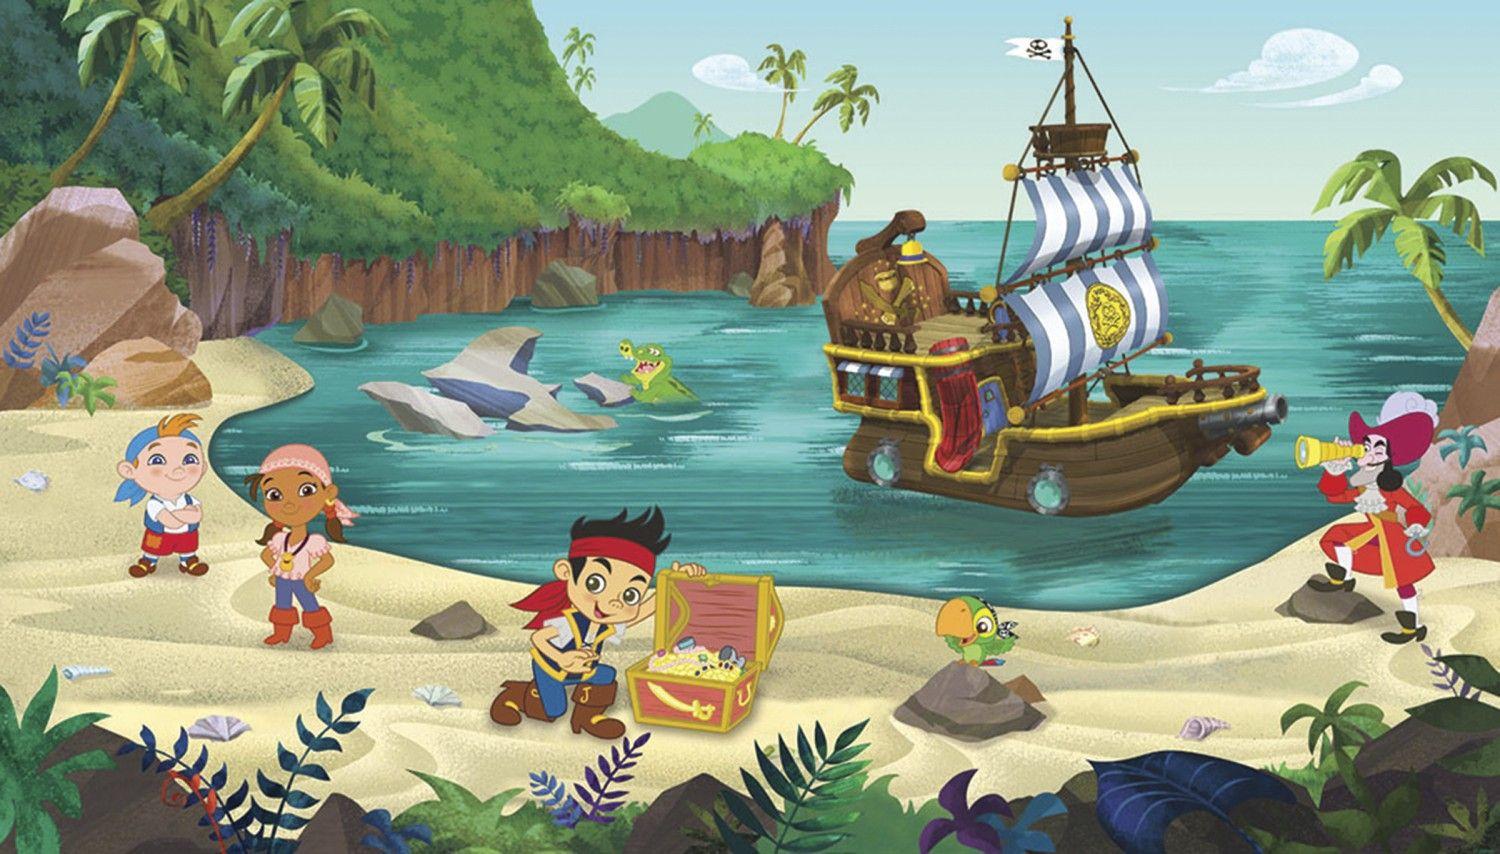 Jake And The Never Land Pirates Wallpapers - Wallpaper Cave